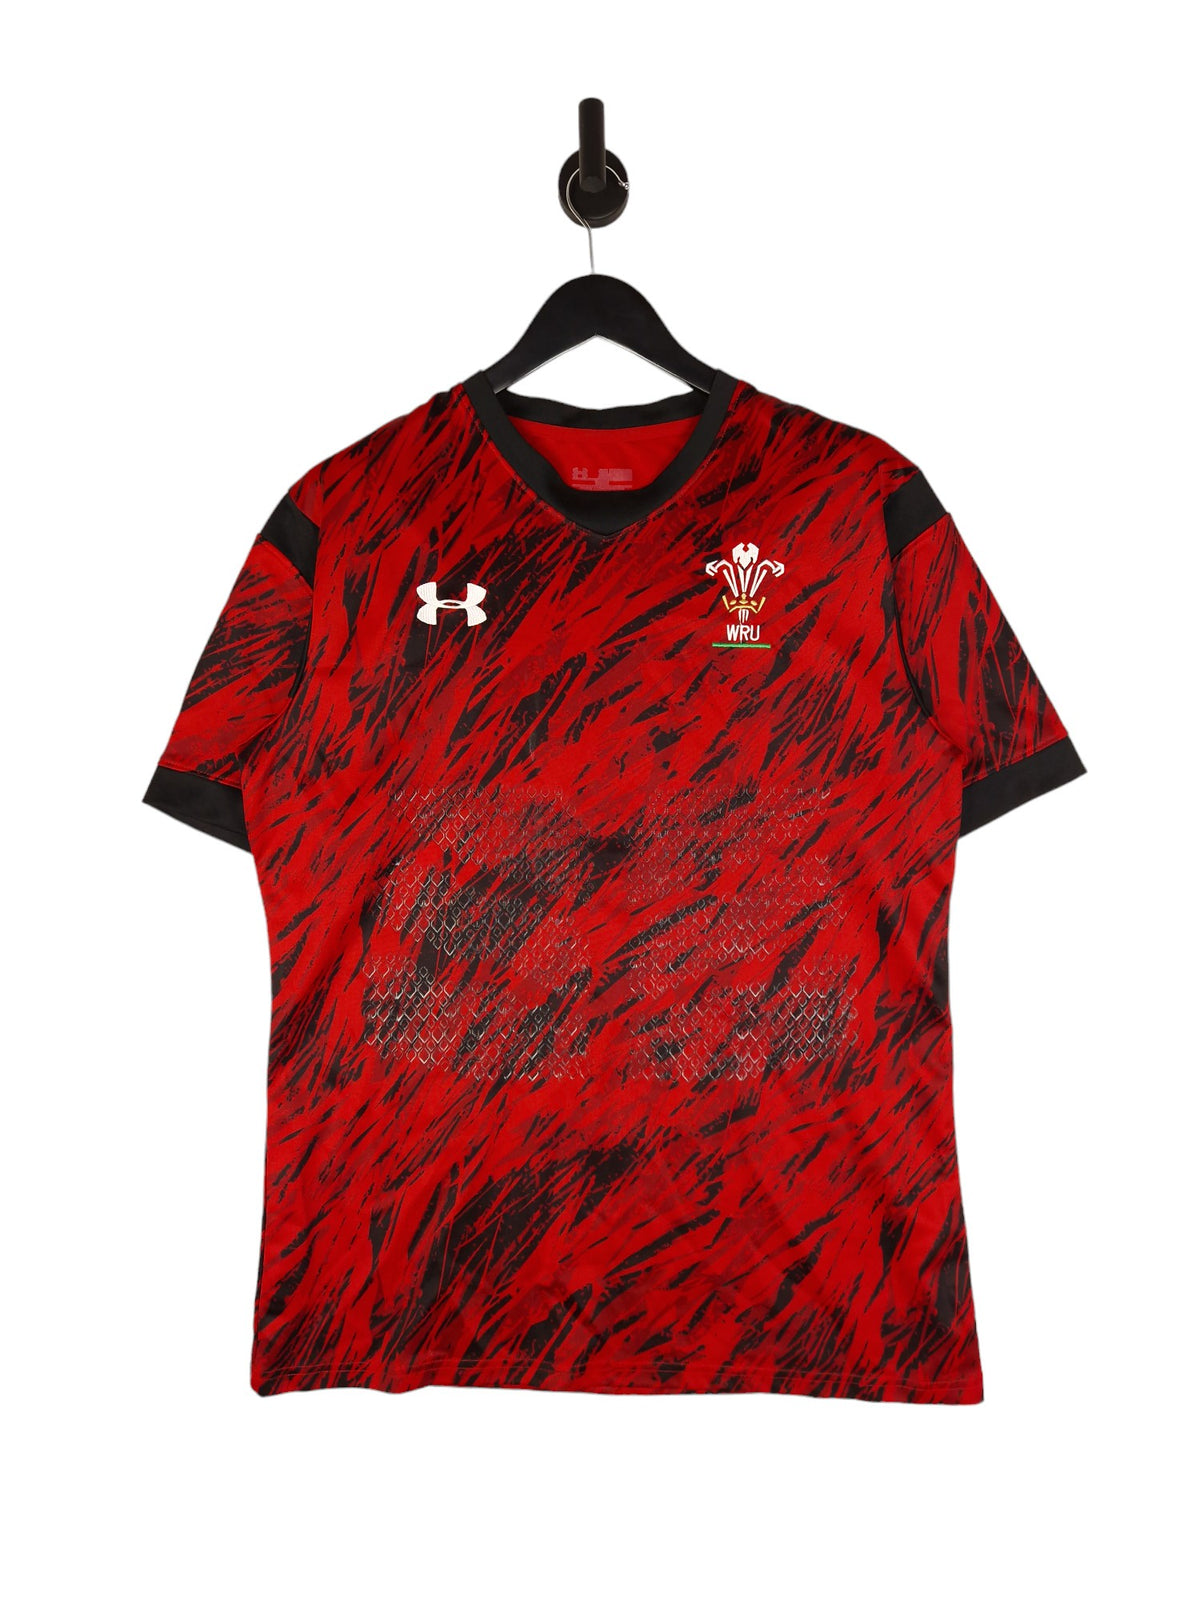 Under Armour WALES 2016 Rugby Sevens Jersey - Size XL